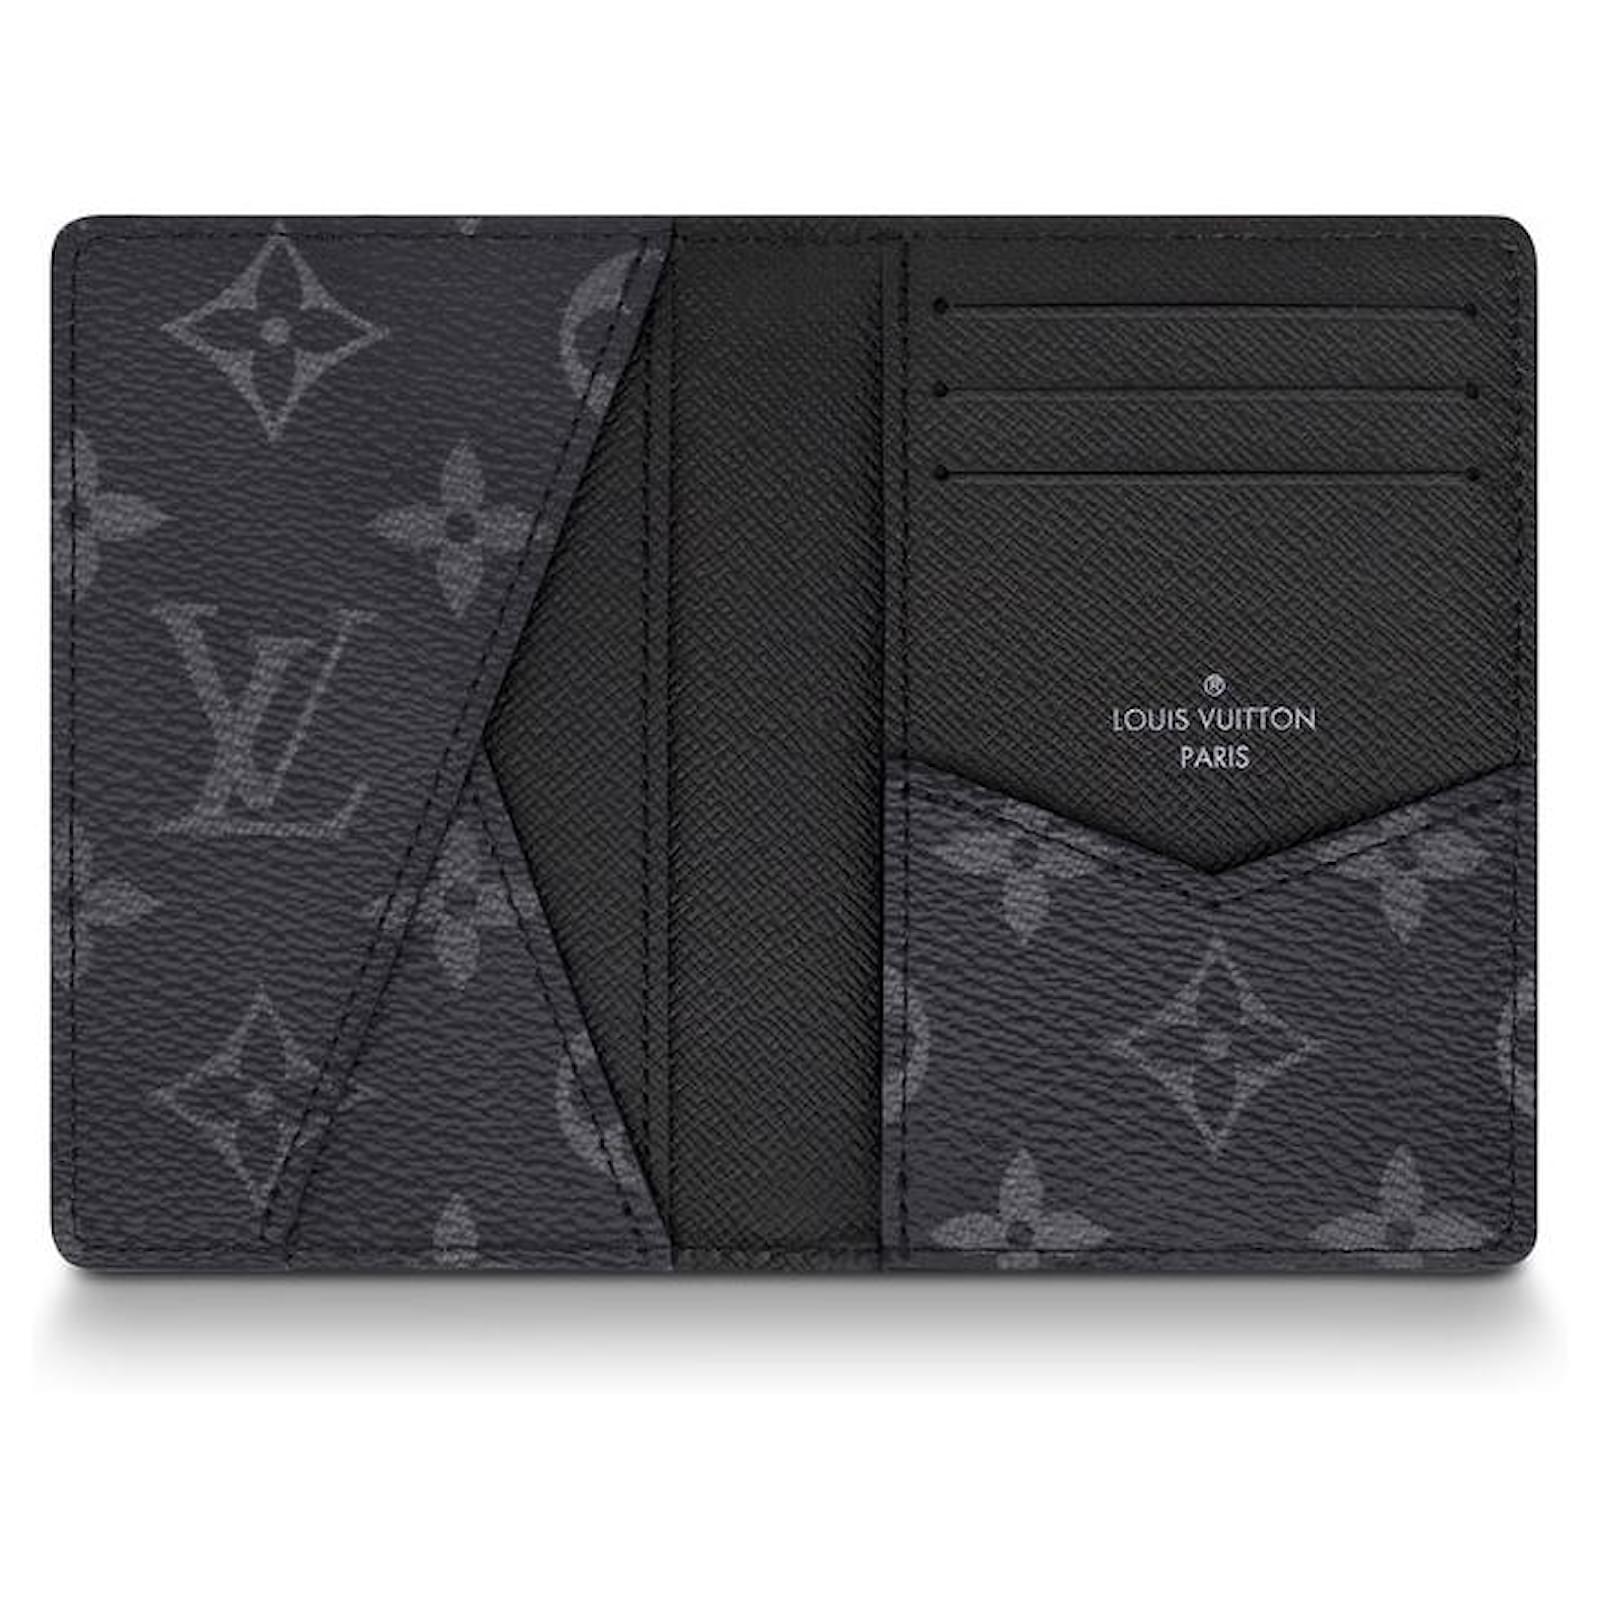 LV x YK Zippy Wallet Epi Leather - Wallets and Small Leather Goods